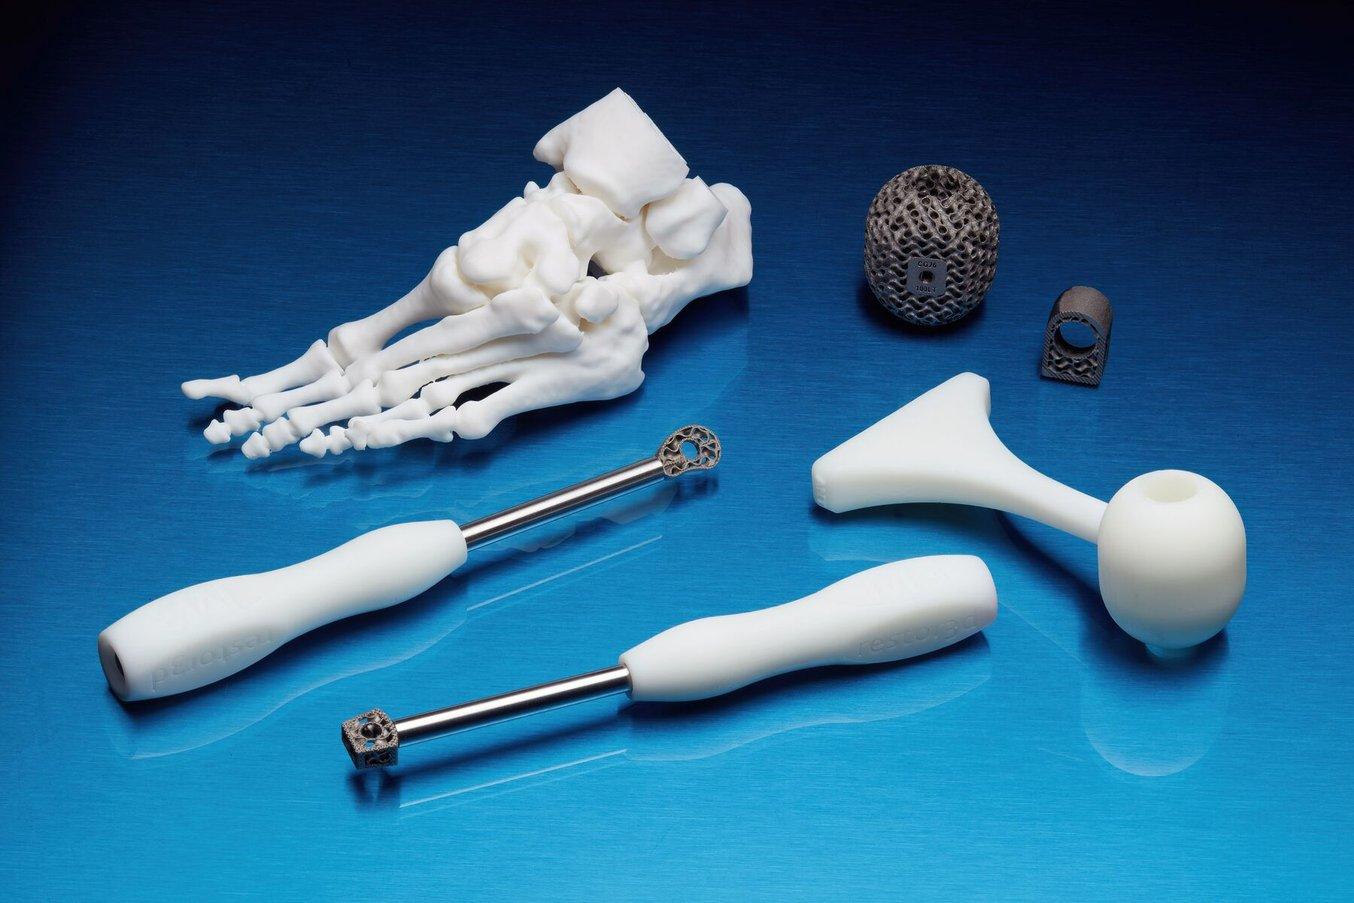 restor3d's single use surgical instruments